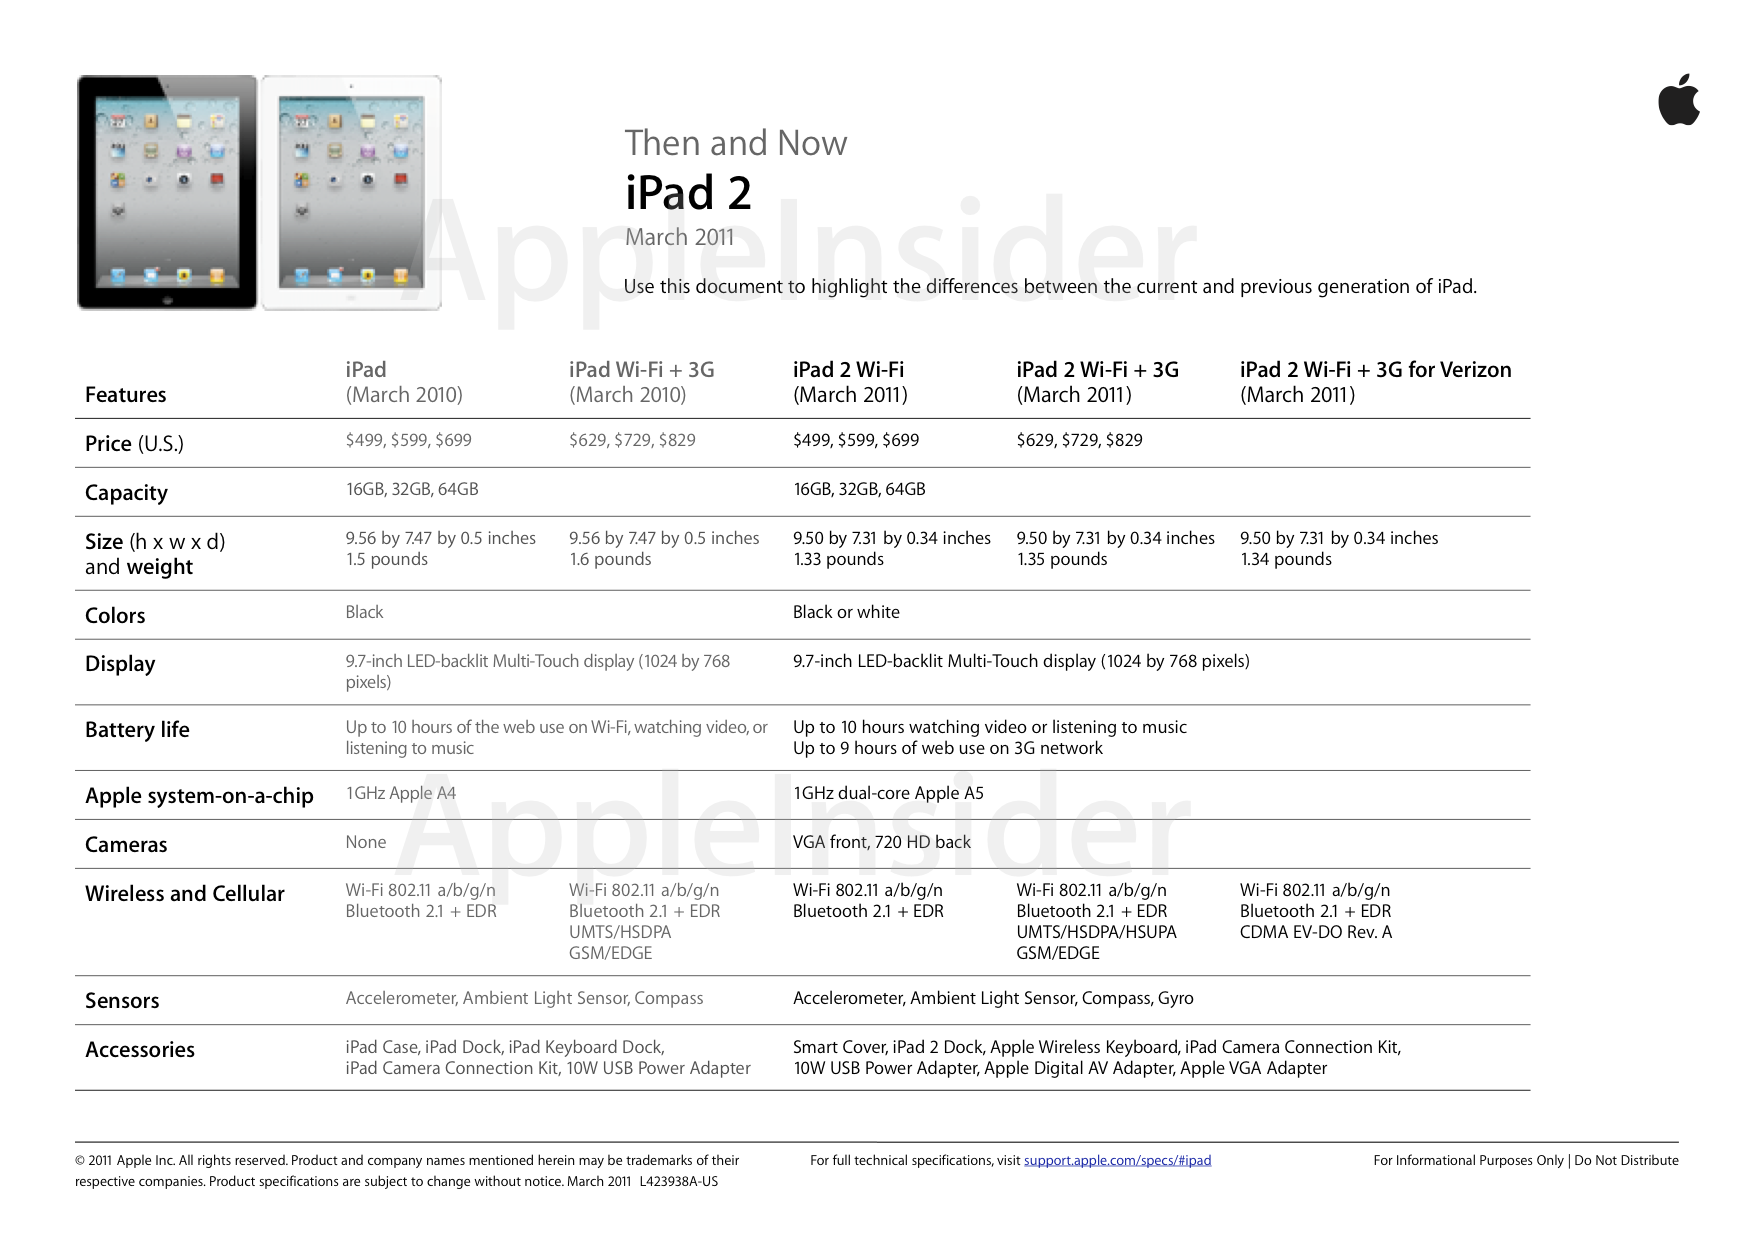 Apple announces redesigned iPad 2: A5 CPU, 2 cameras, ships March 11 ...